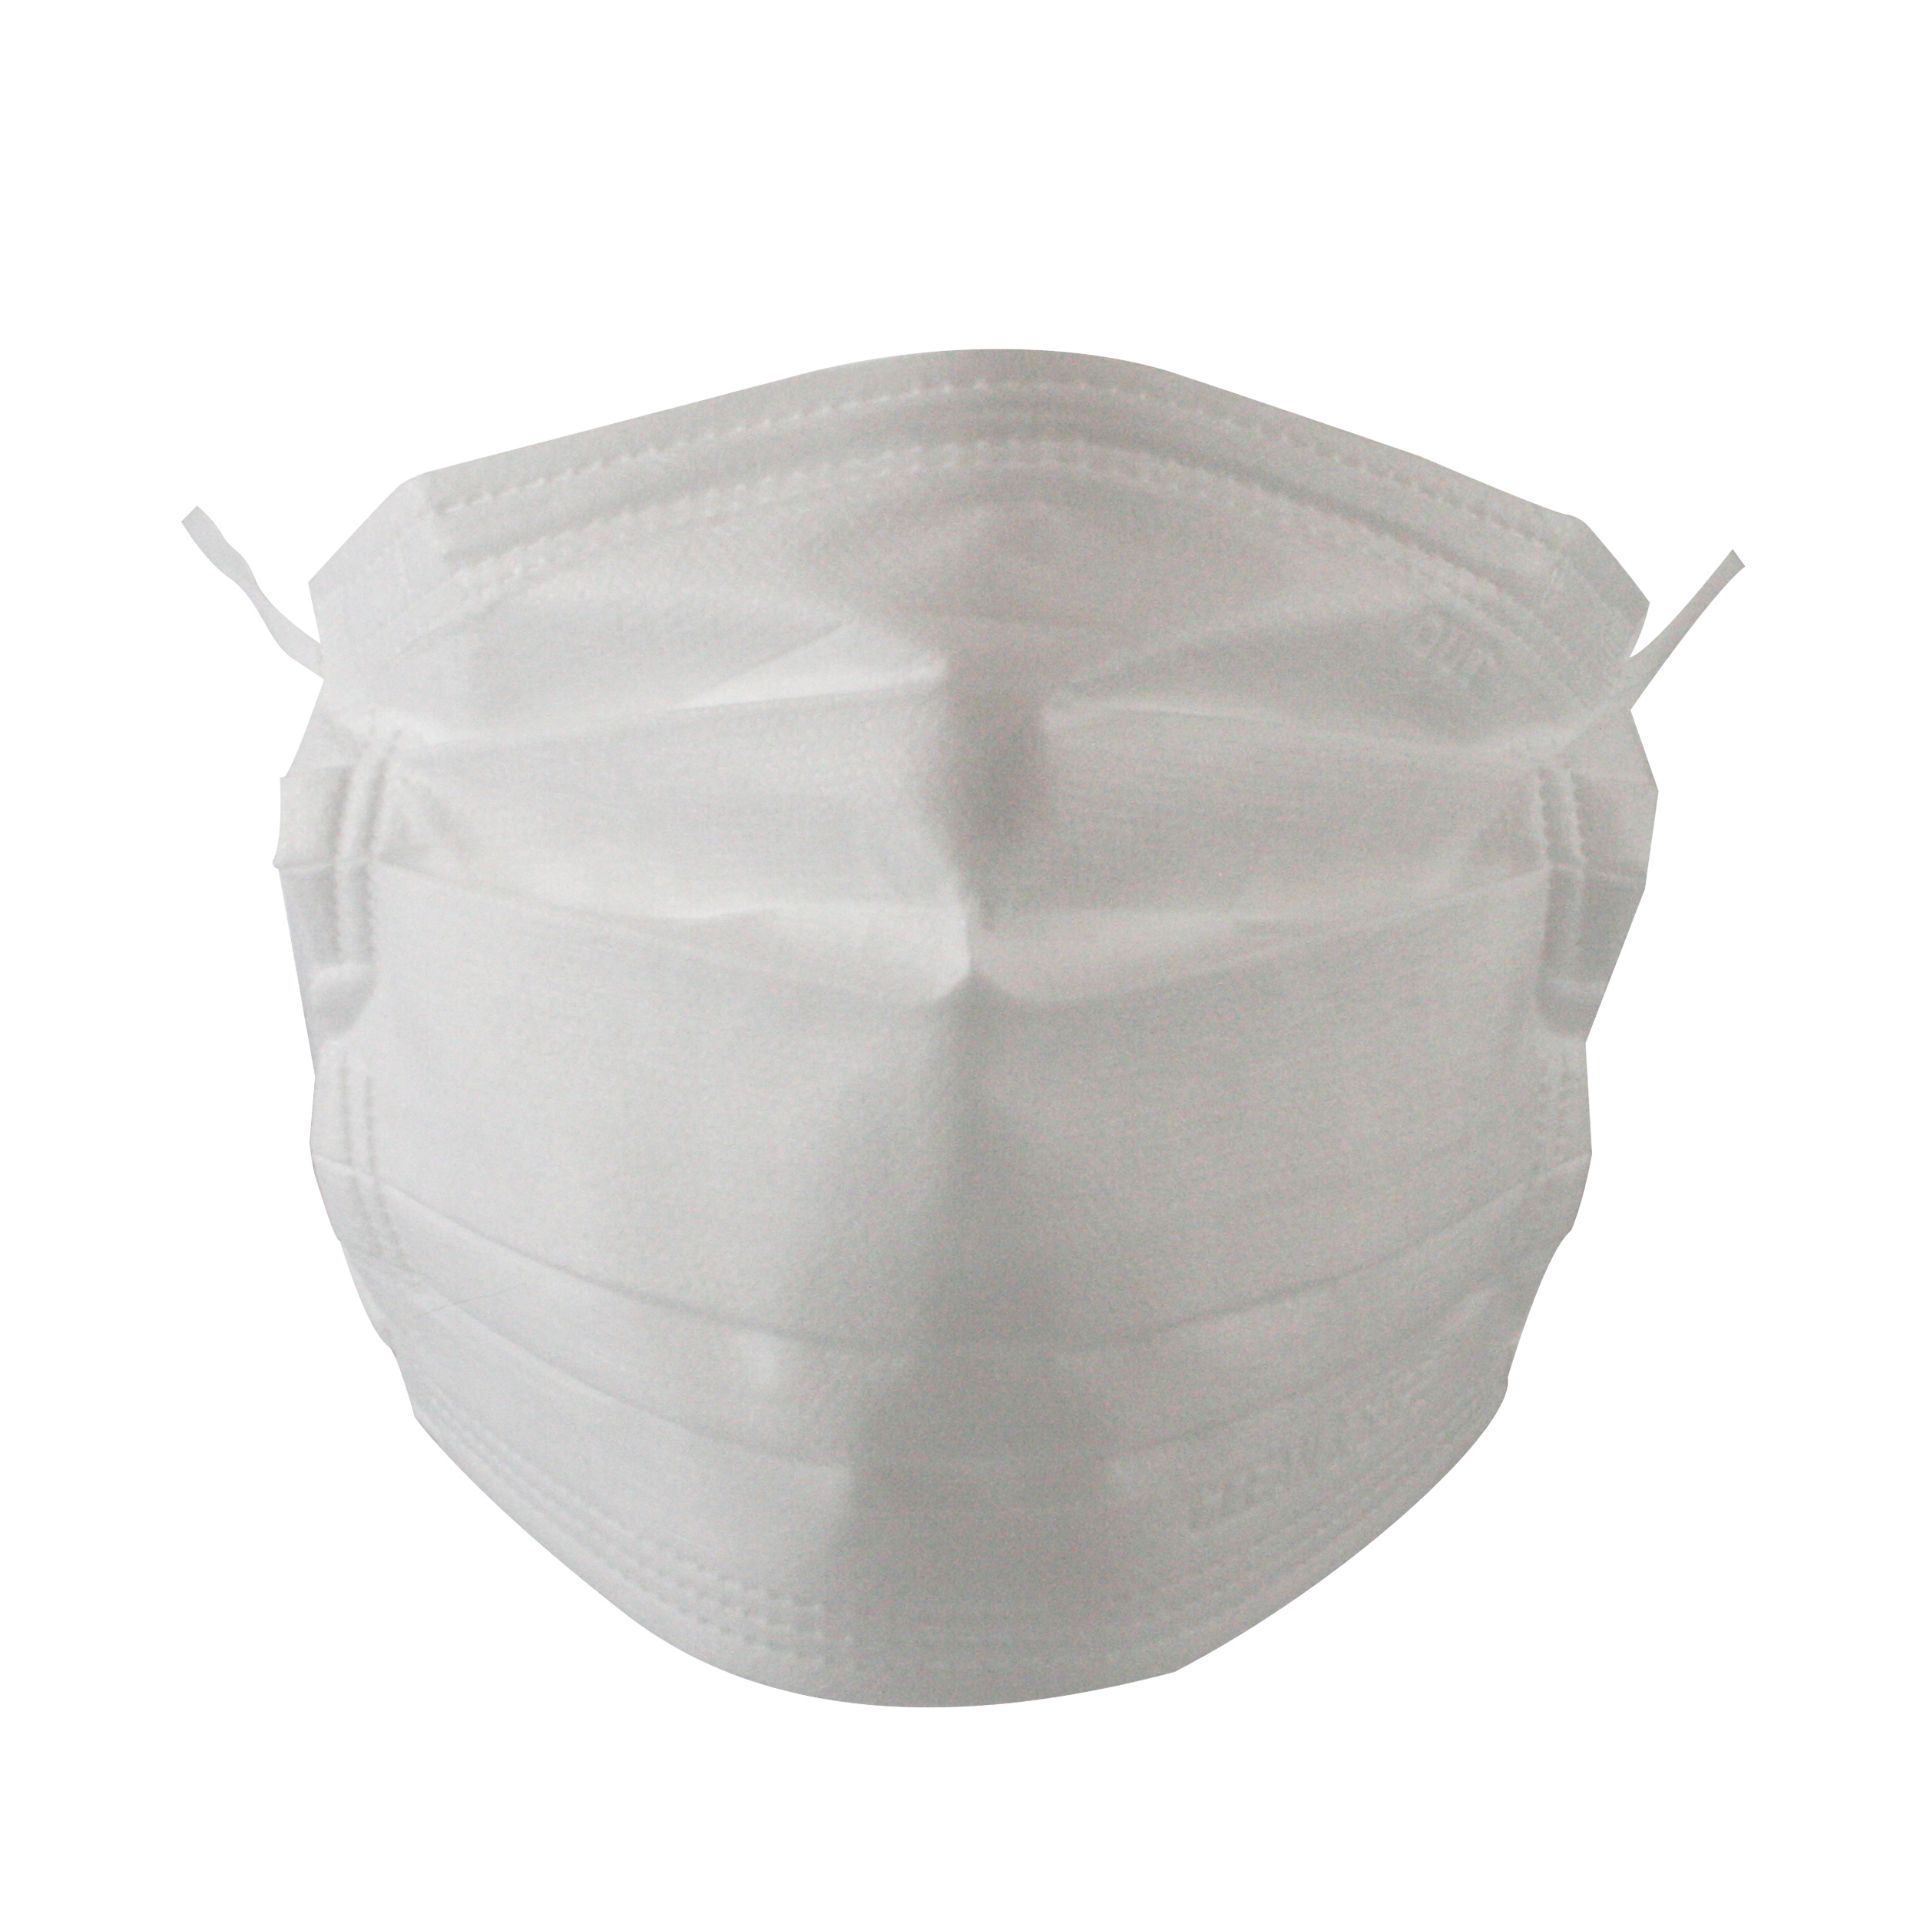 Medical Grade Type IIR disposable face masks: x 2000 - Image 3 of 5